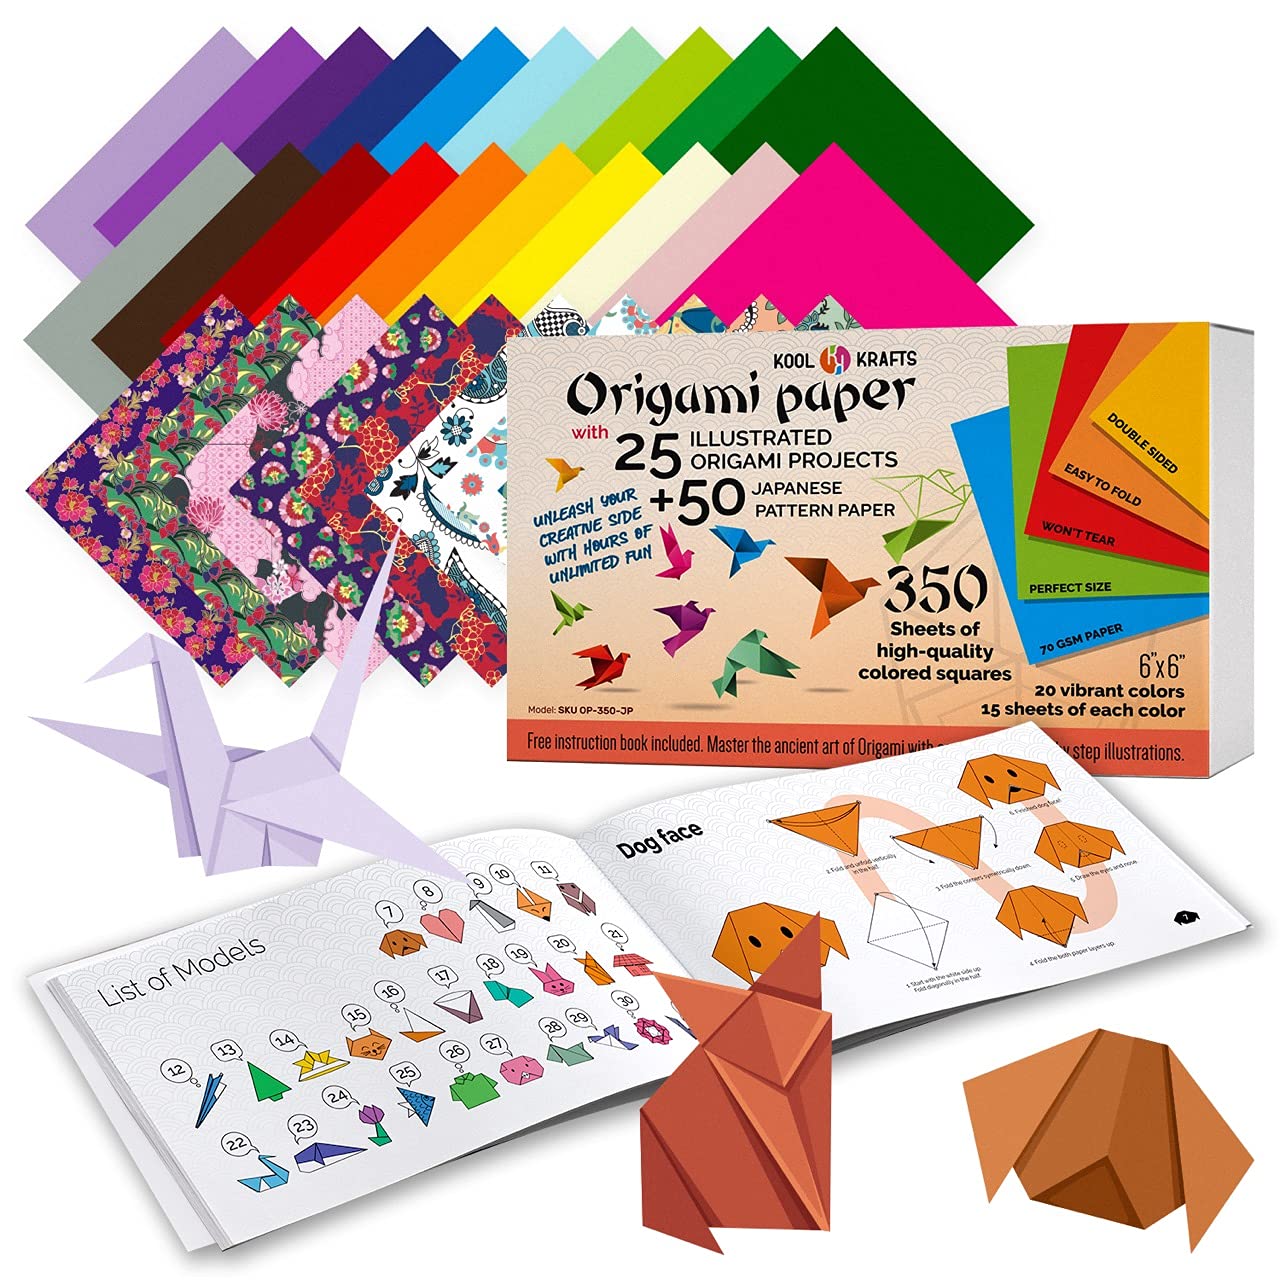 Kool Krafts Origami Paper | 350 Origami Paper Kit | Set Includes - 300 Sheets 20 Colors 6x6 | 50 Traditional Japanese Patterns | Origami Book 25 Easy